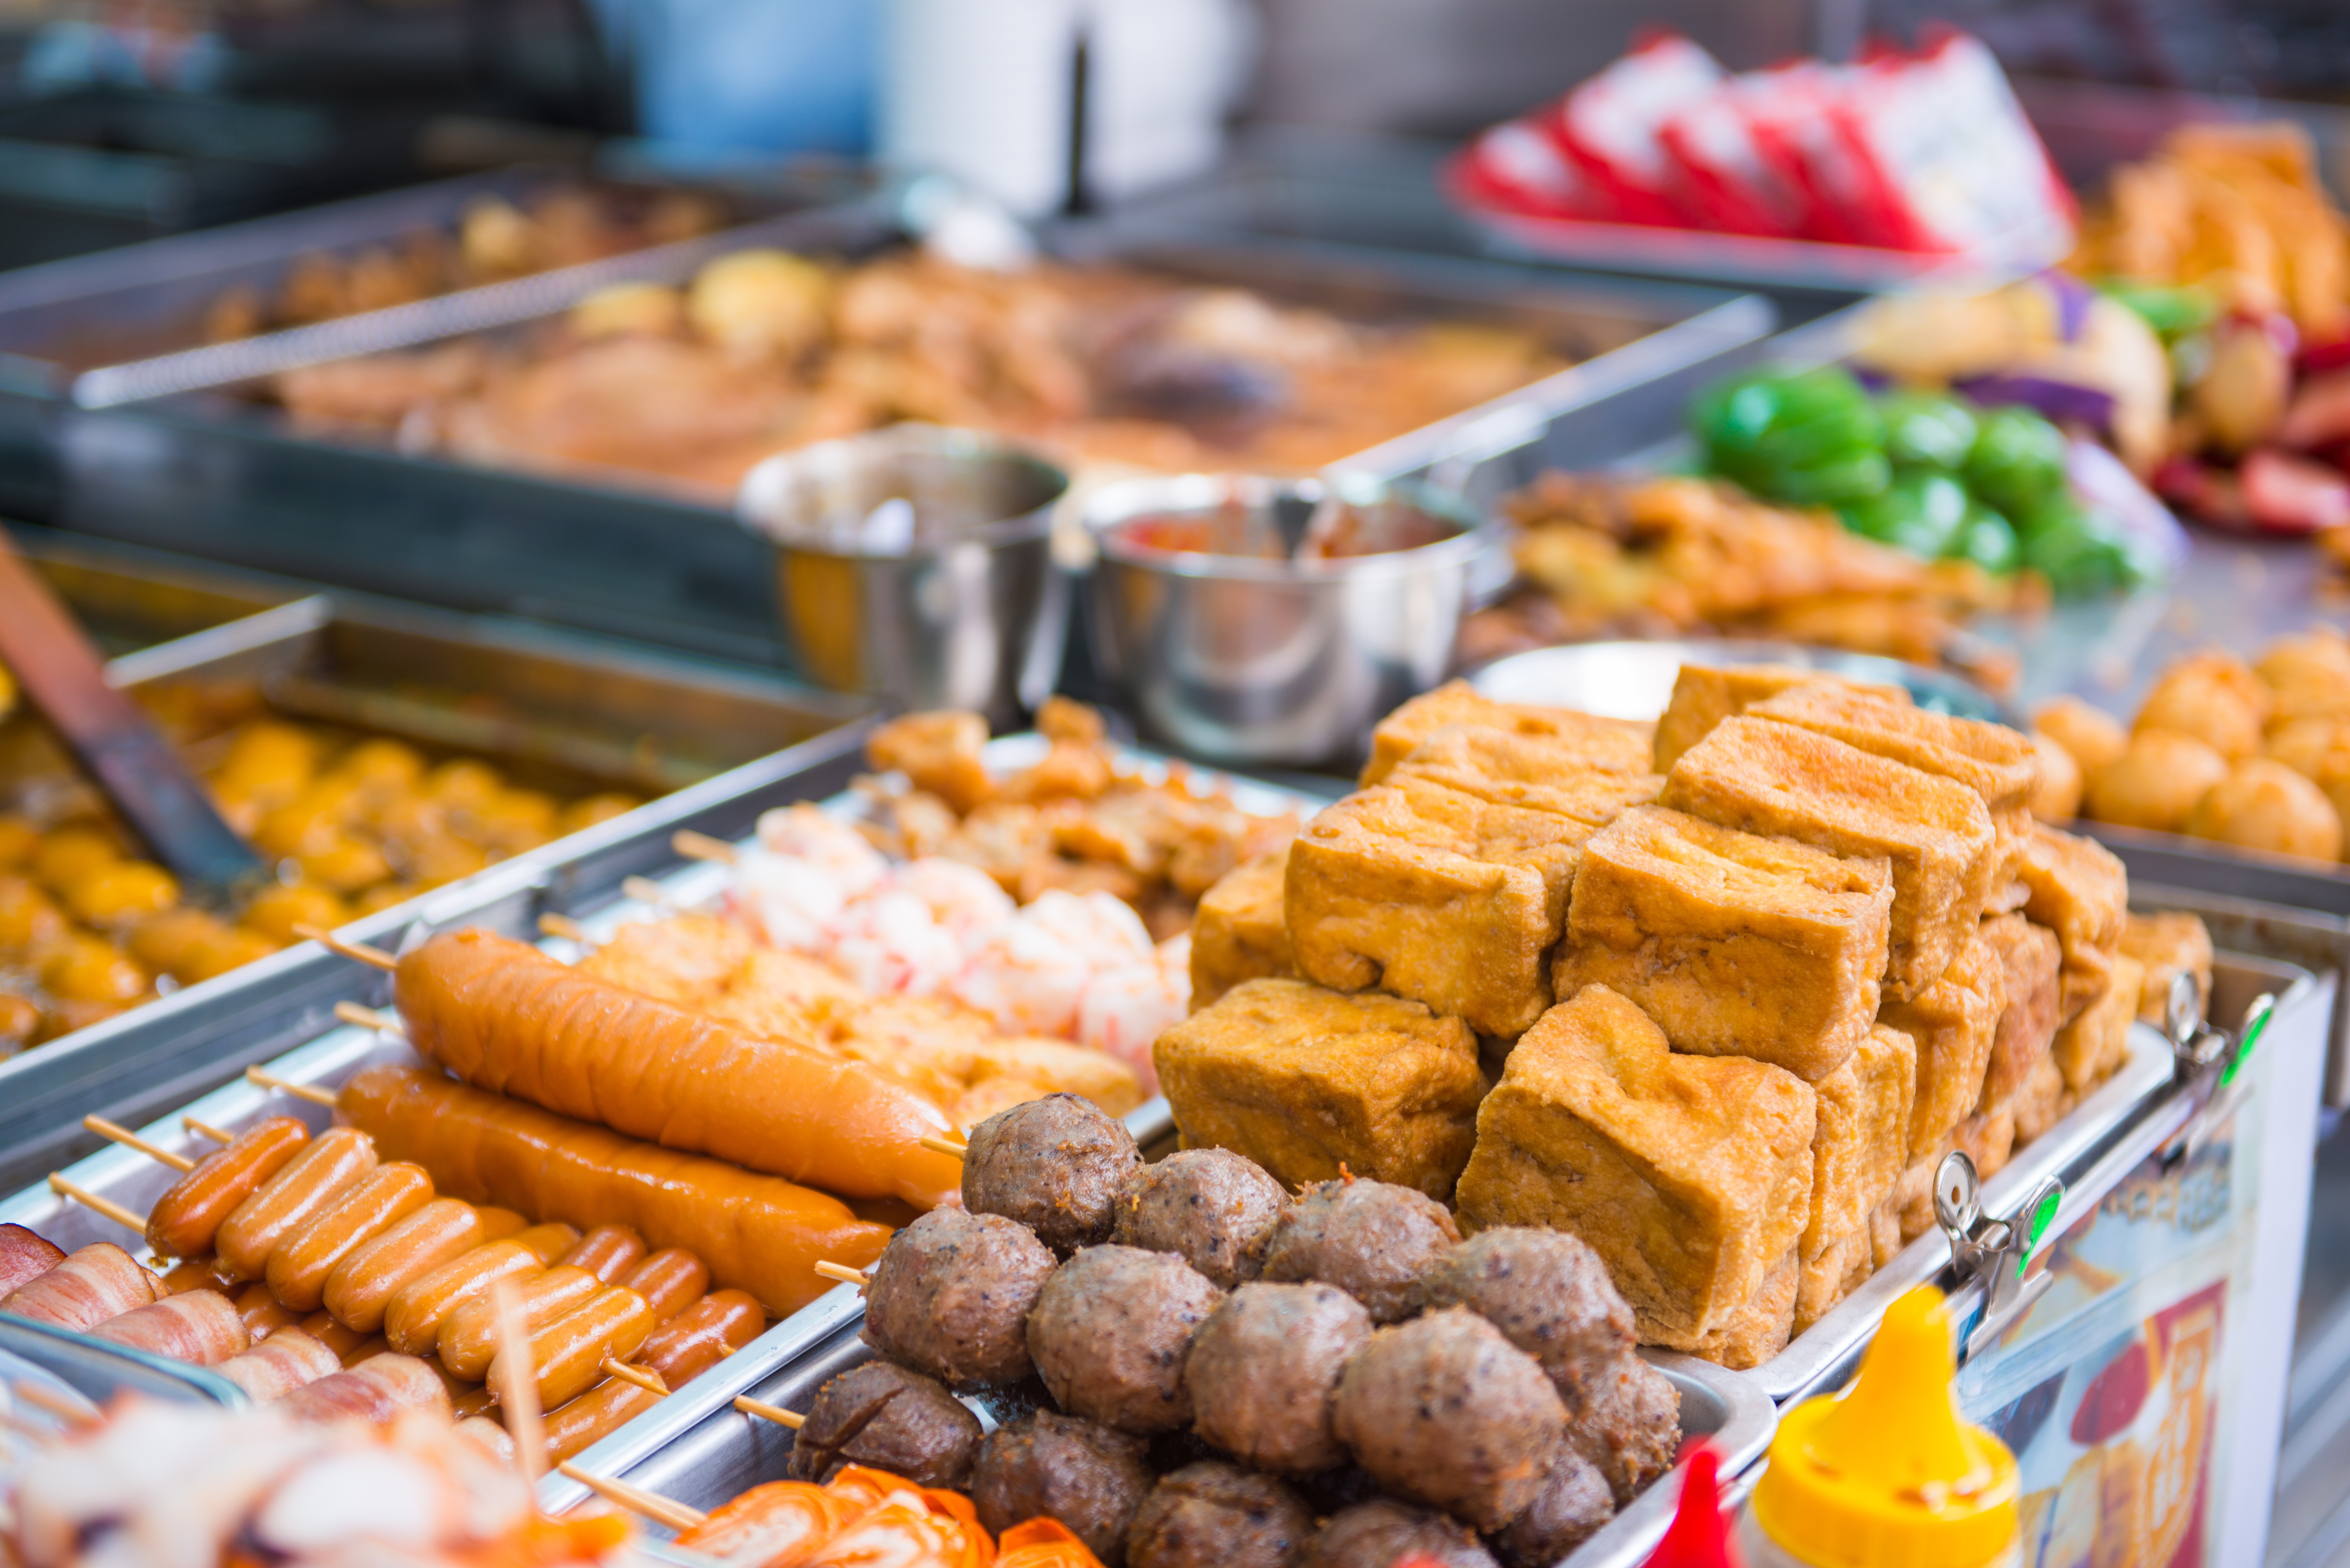 Lovers of street food need to remember that these snacks are often high in sodium and calories. Photo: Shutterstock